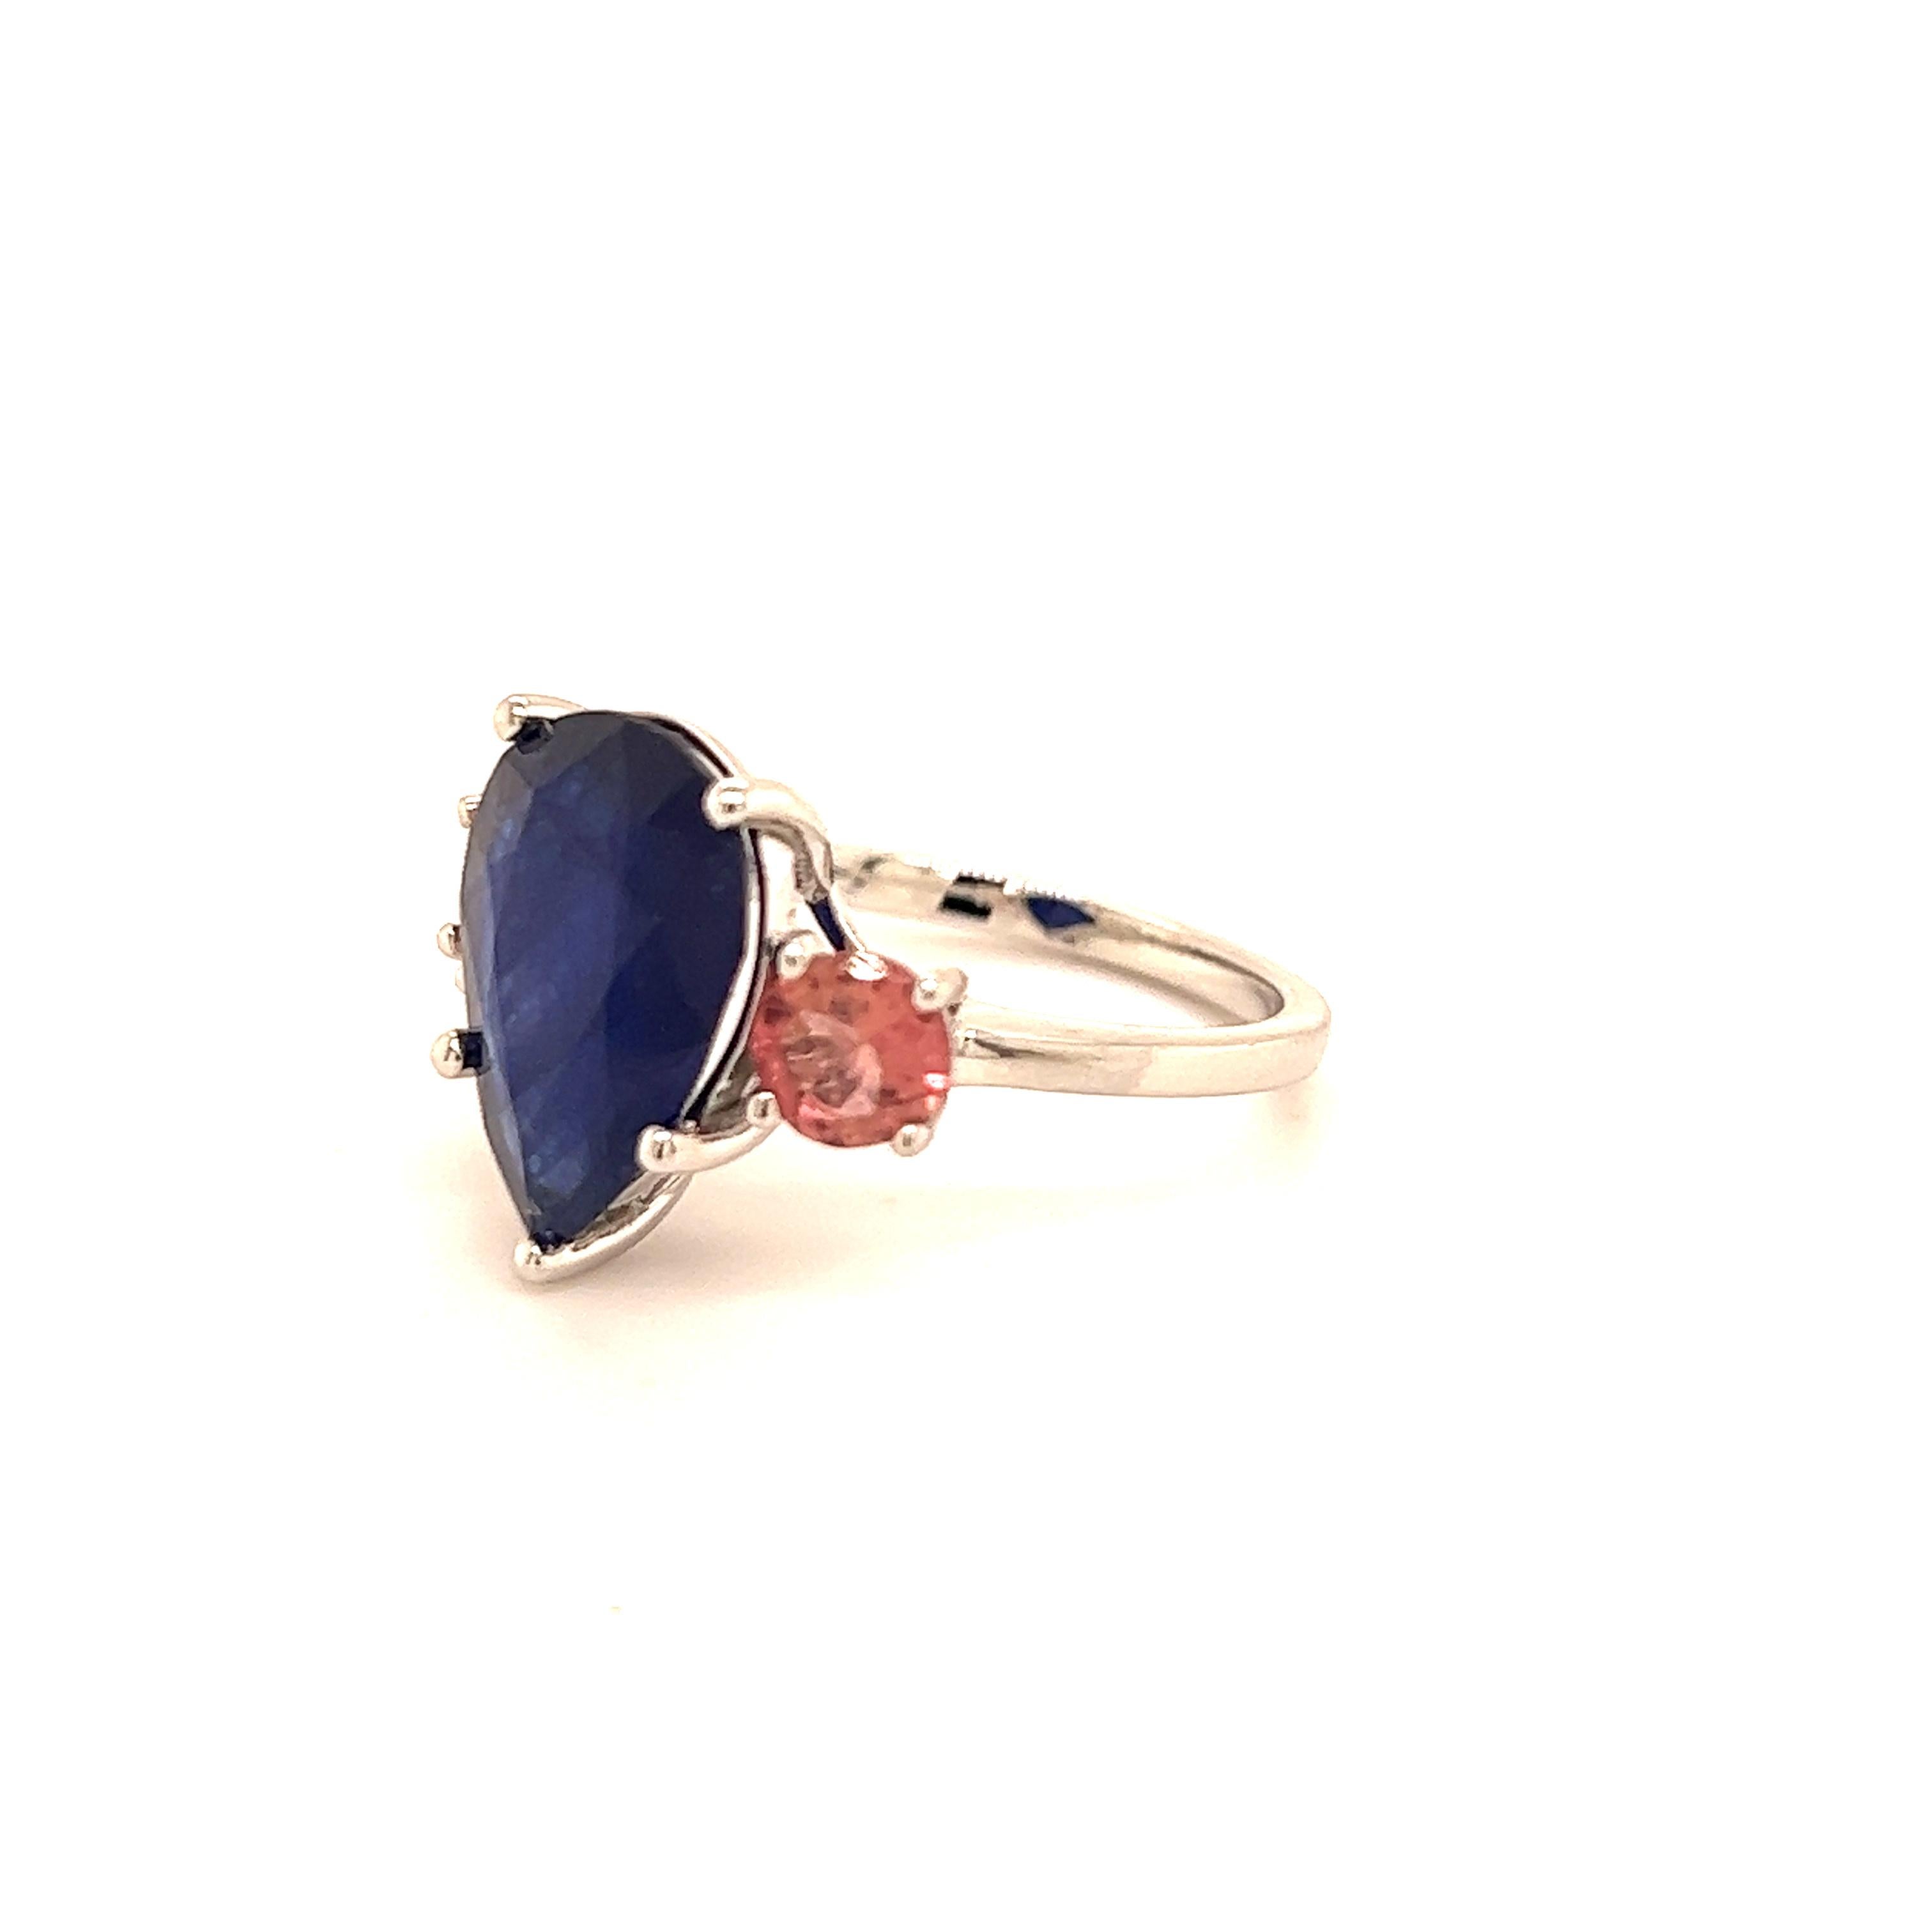 Natural Sapphire Diamond Ring 7 14k W Gold 6.16 TCW Certified For Sale 4